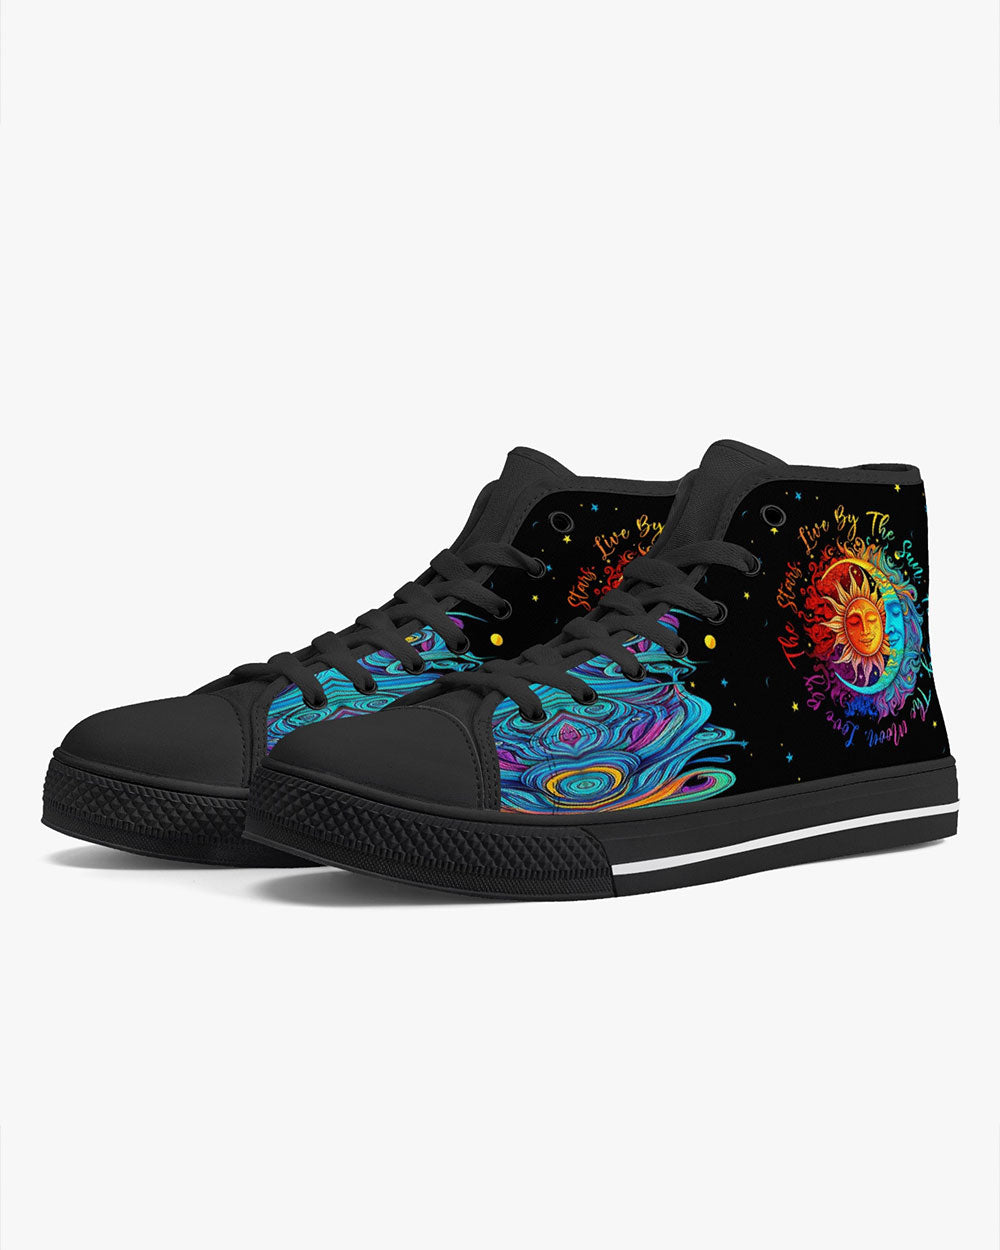 LIVE BY THE SUN HIGH TOP CANVAS SHOES - TYTW1803232